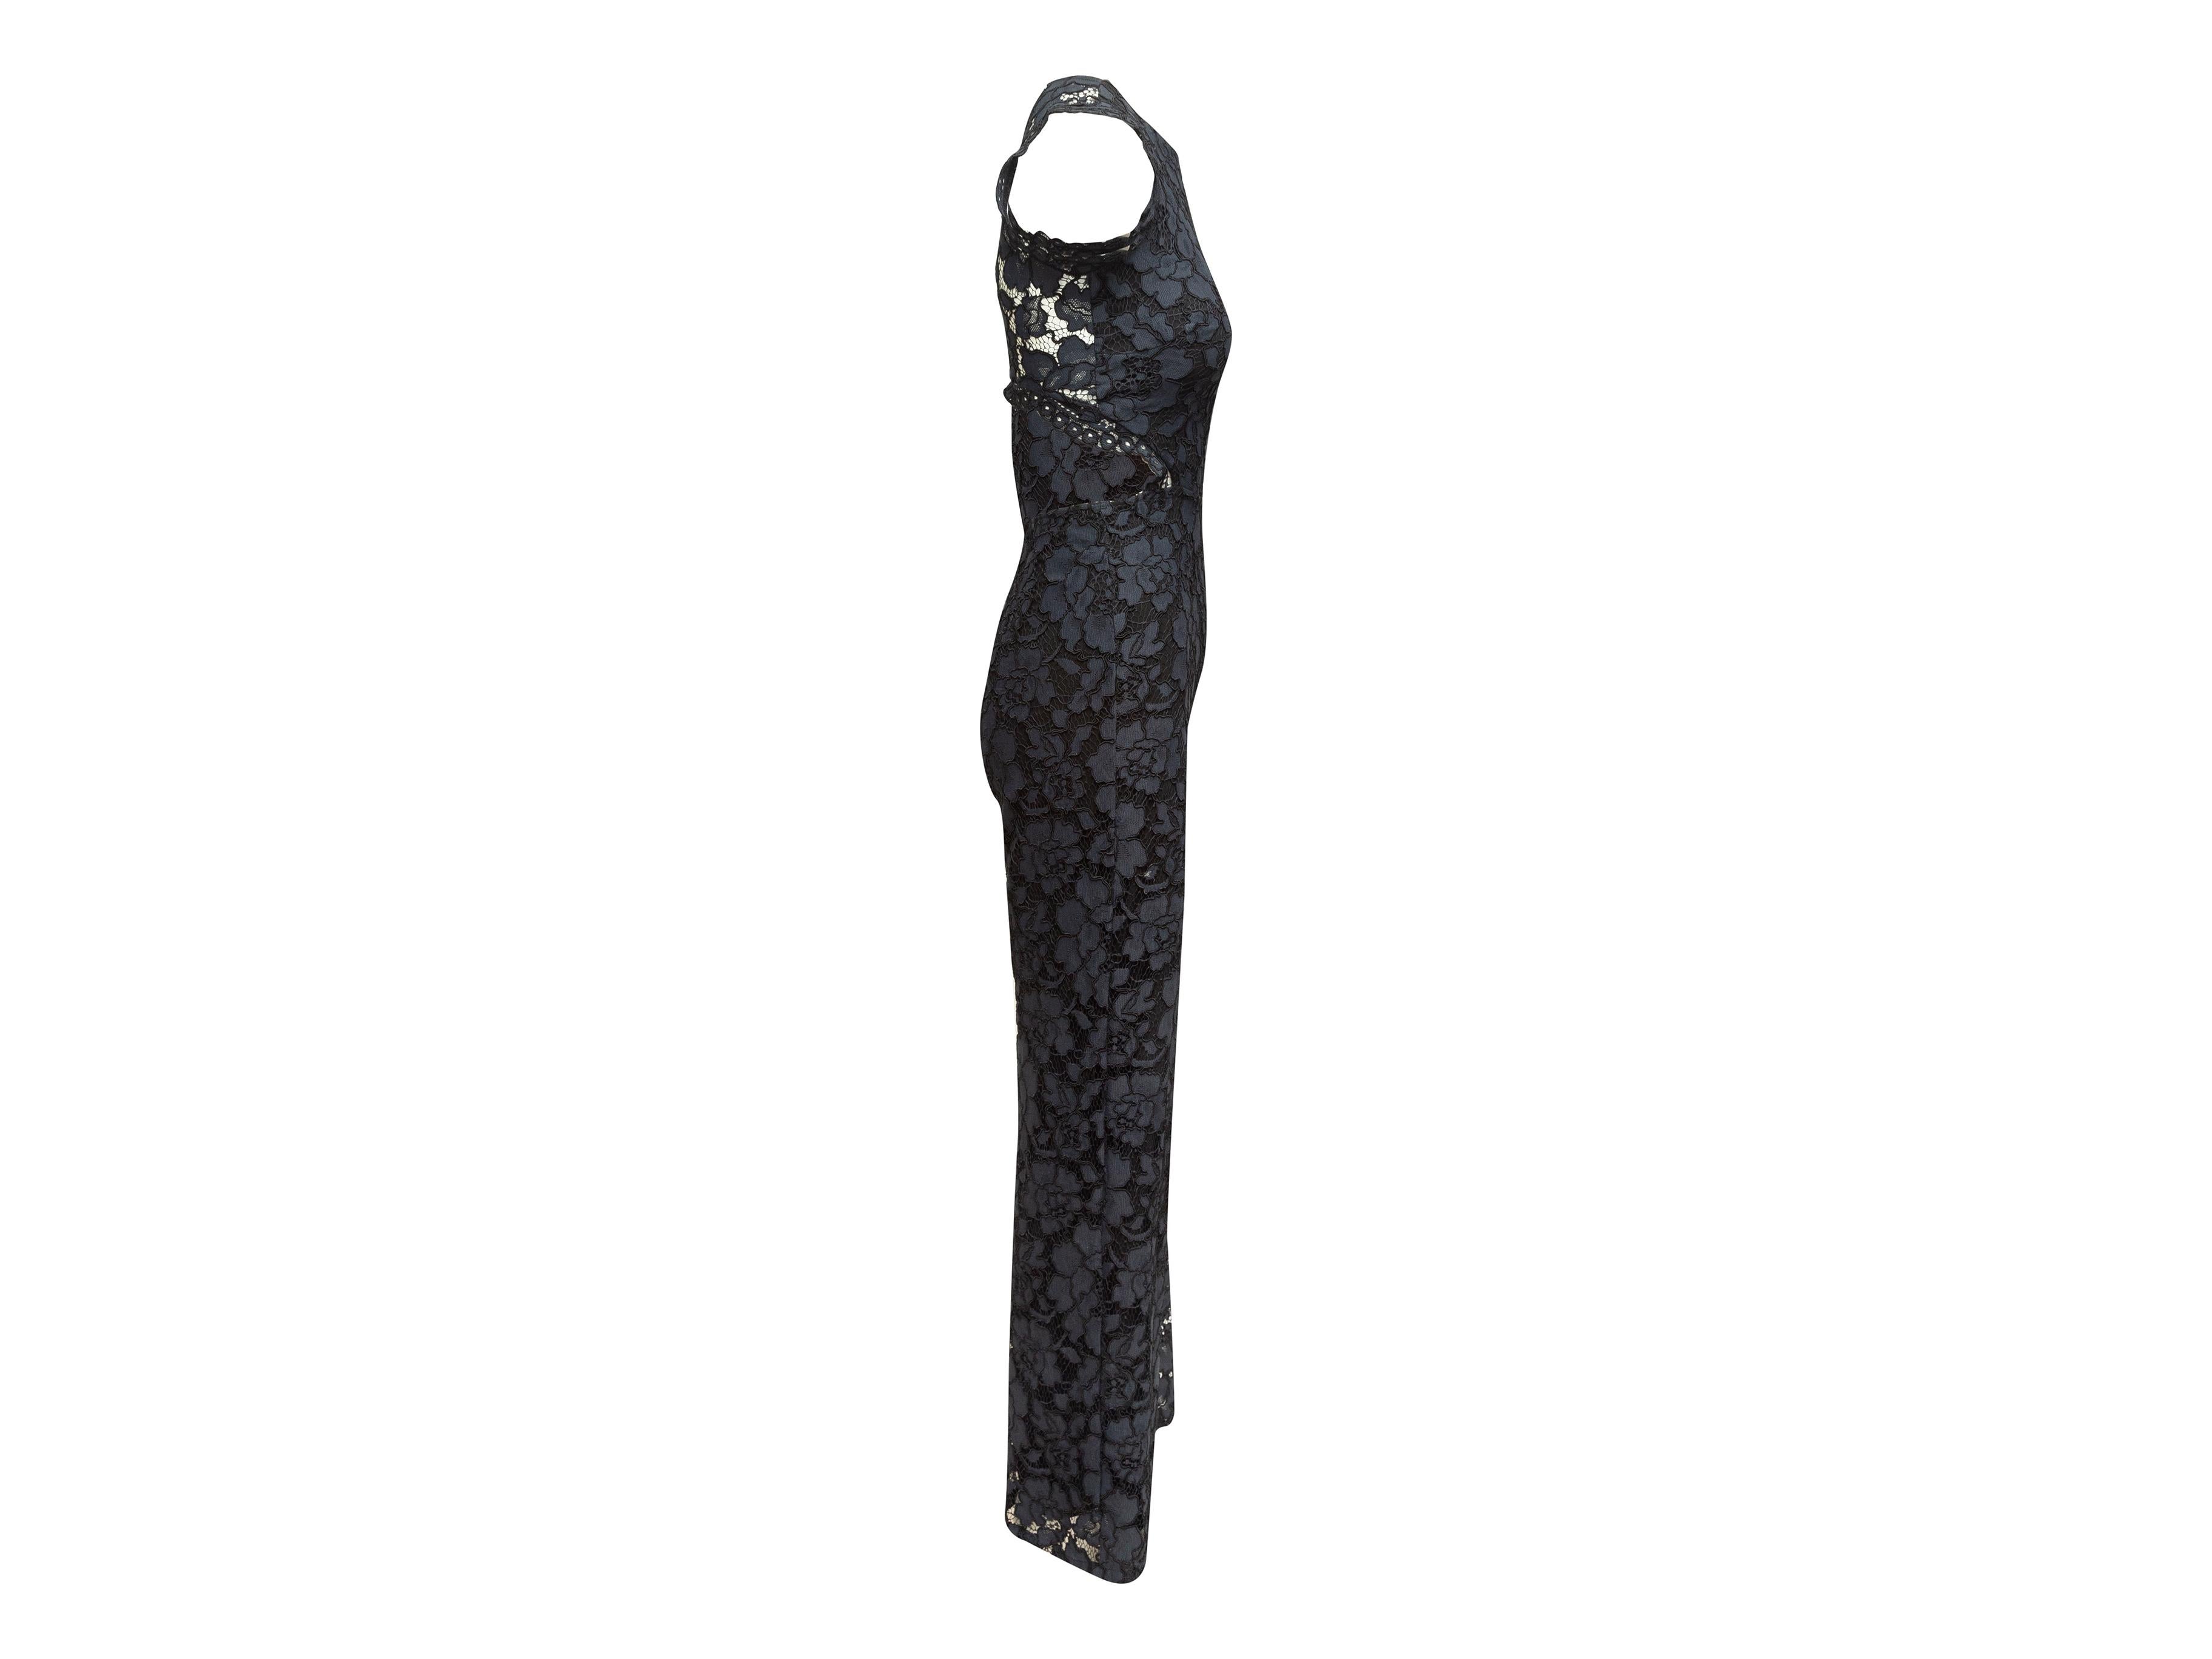 Product details: Navy blue and black lace sleeveless jumpsuit by Alexis. Crew neck. Zip closures at back. 26